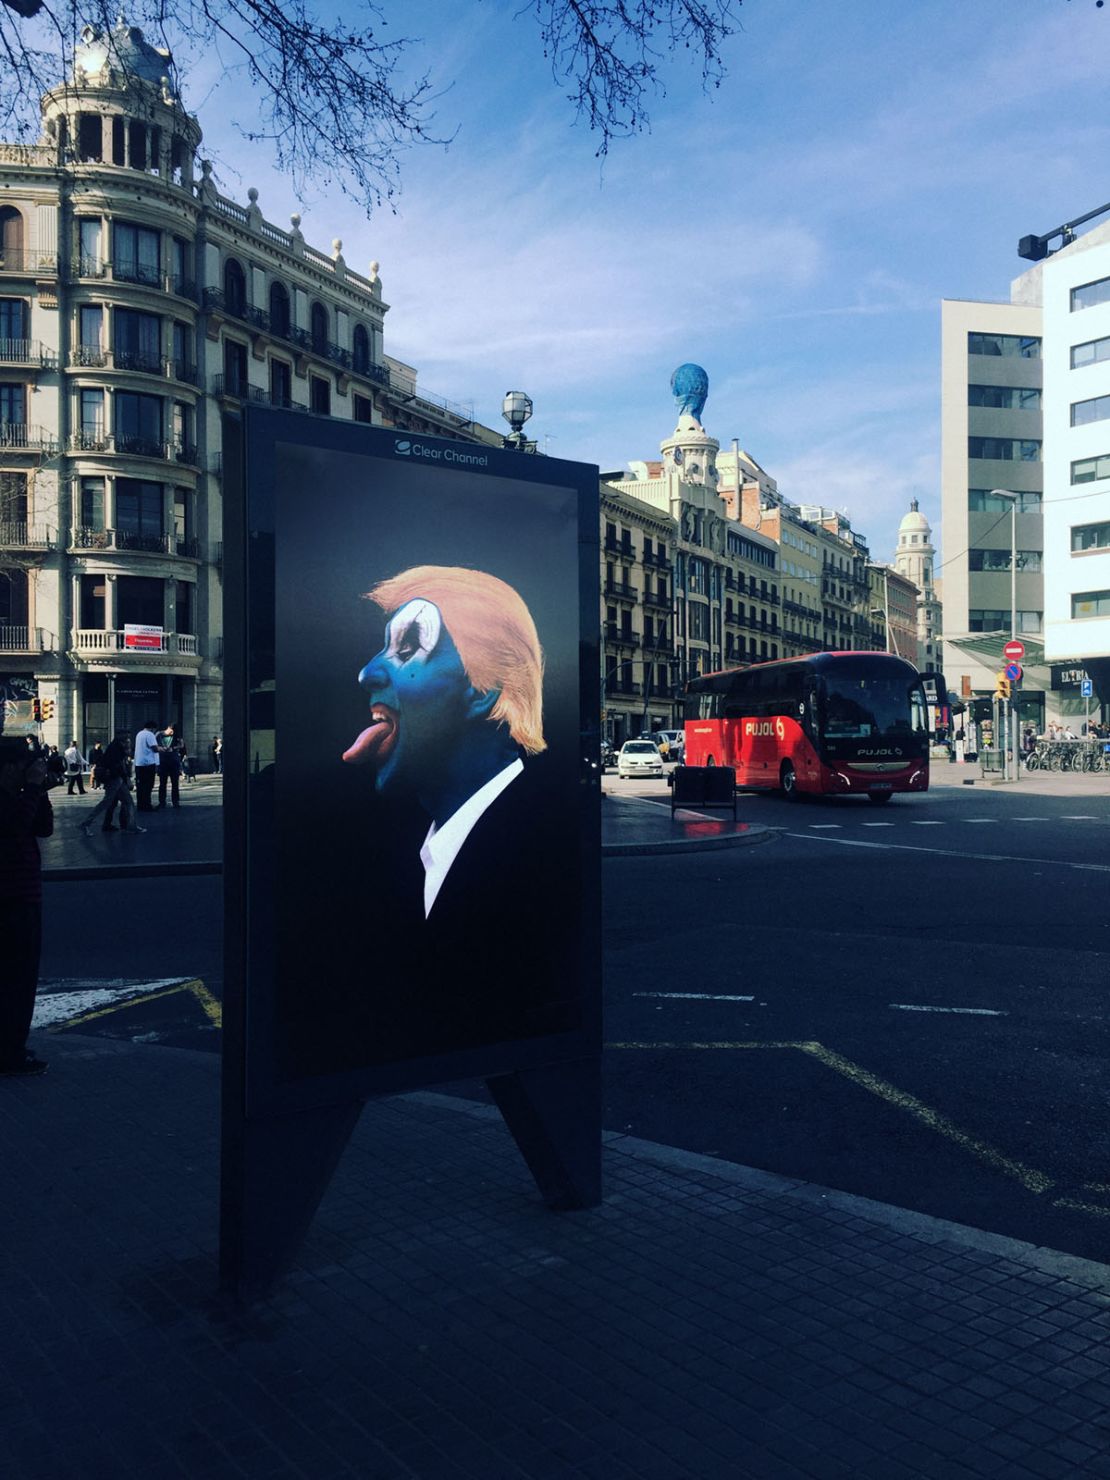 "The Beast" is one of many satirical posters by the Brandalism subvertising collective.